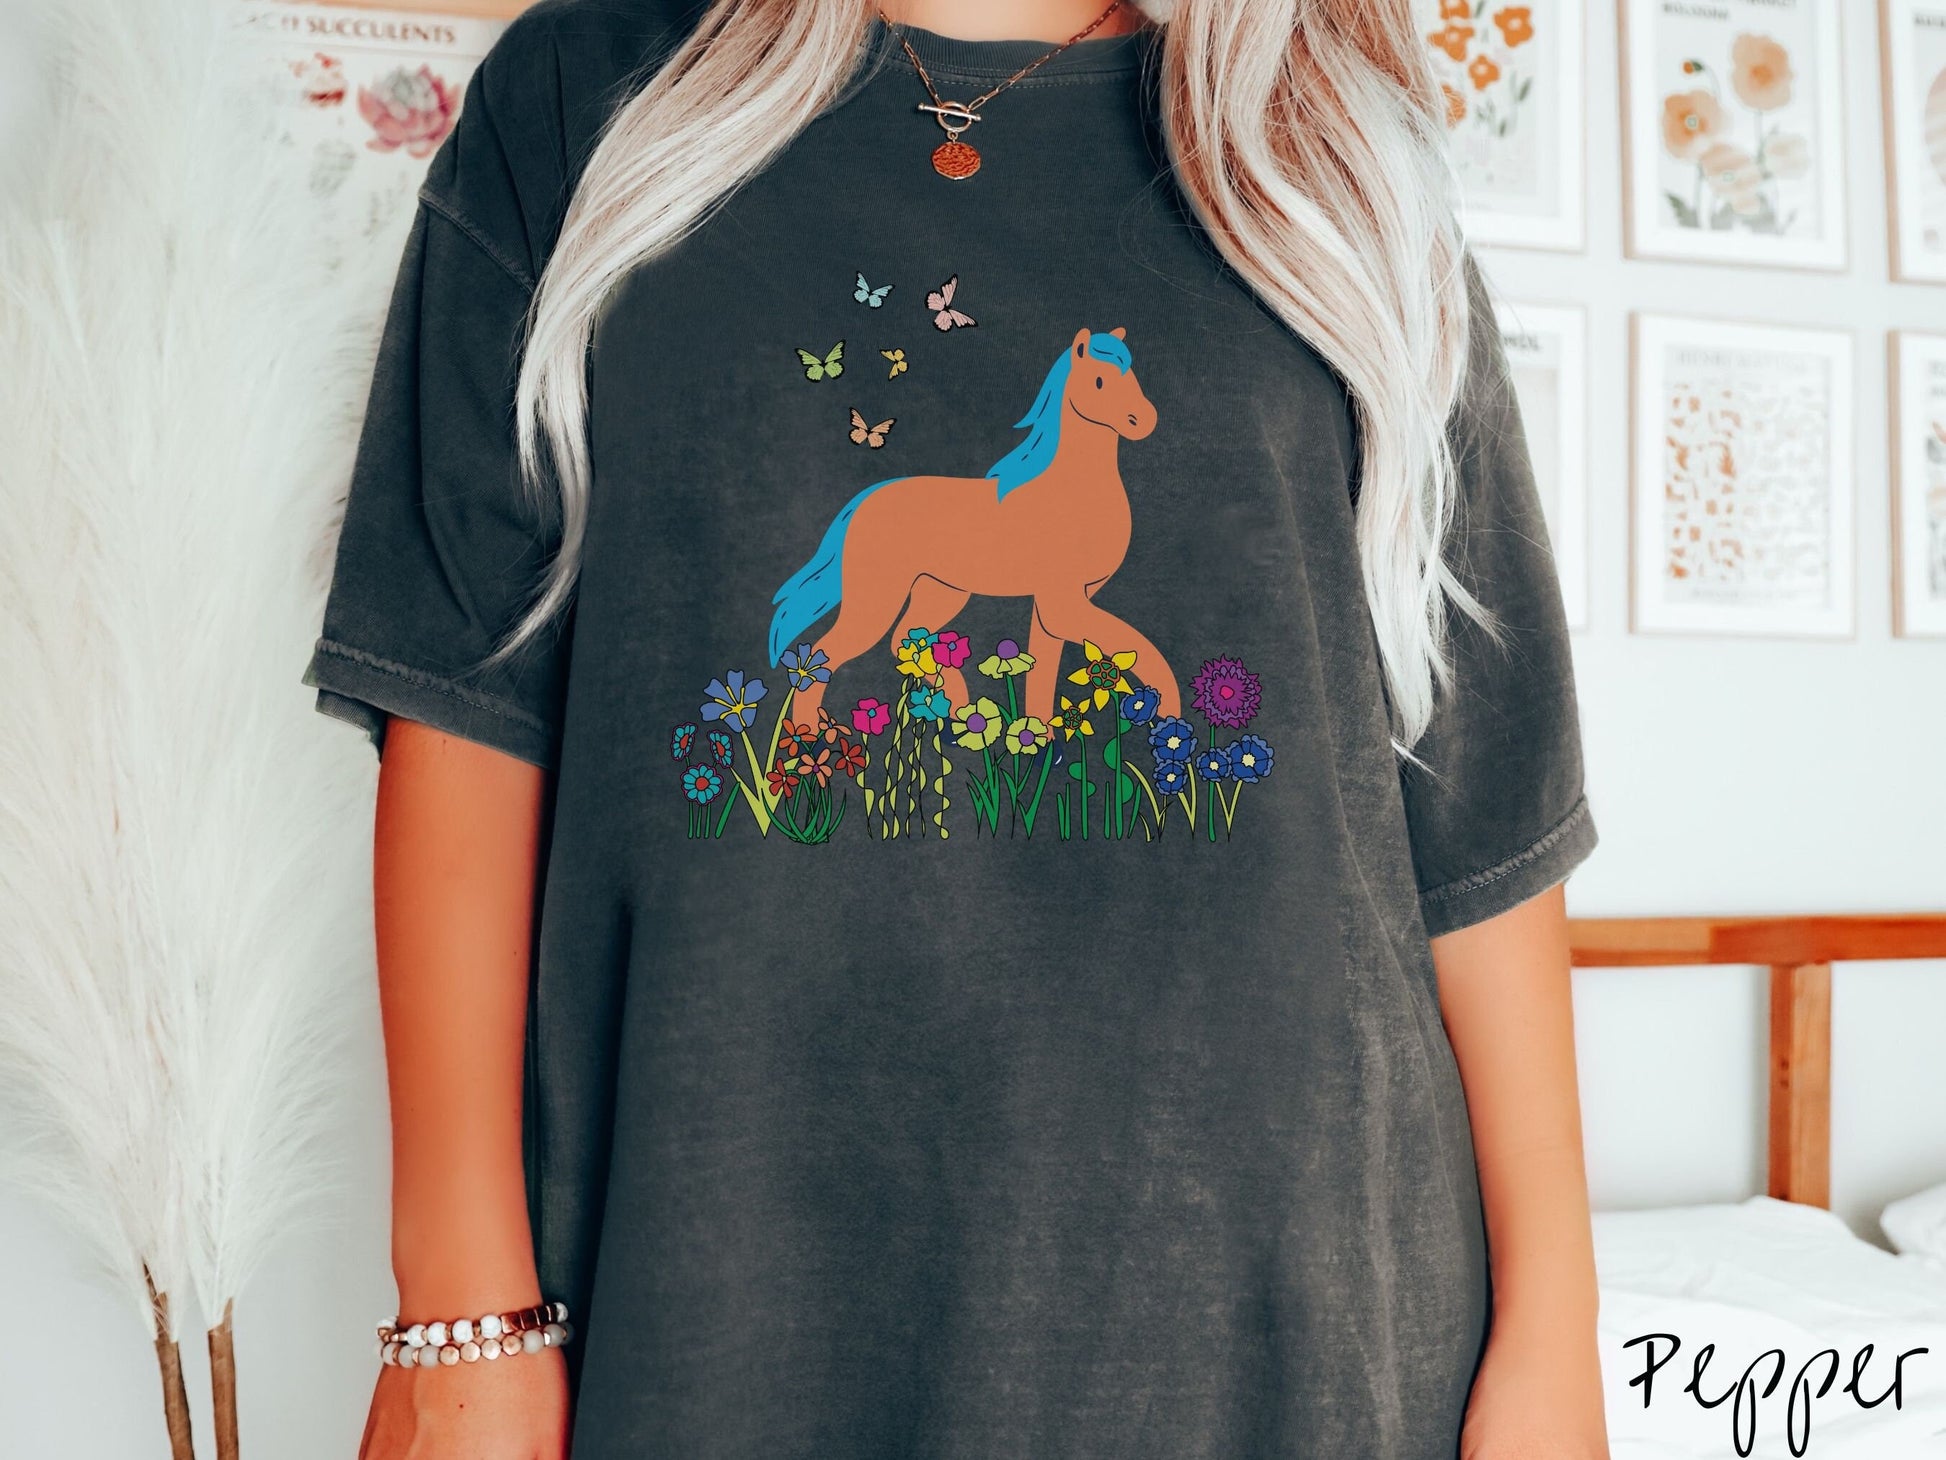 A woman wearing a cute, vintage pepper colored Comfort Colors shirt with a brown horse with blue hair walking through a field of colorful flowers and grass. There are colorful butterflies flying above the horse.